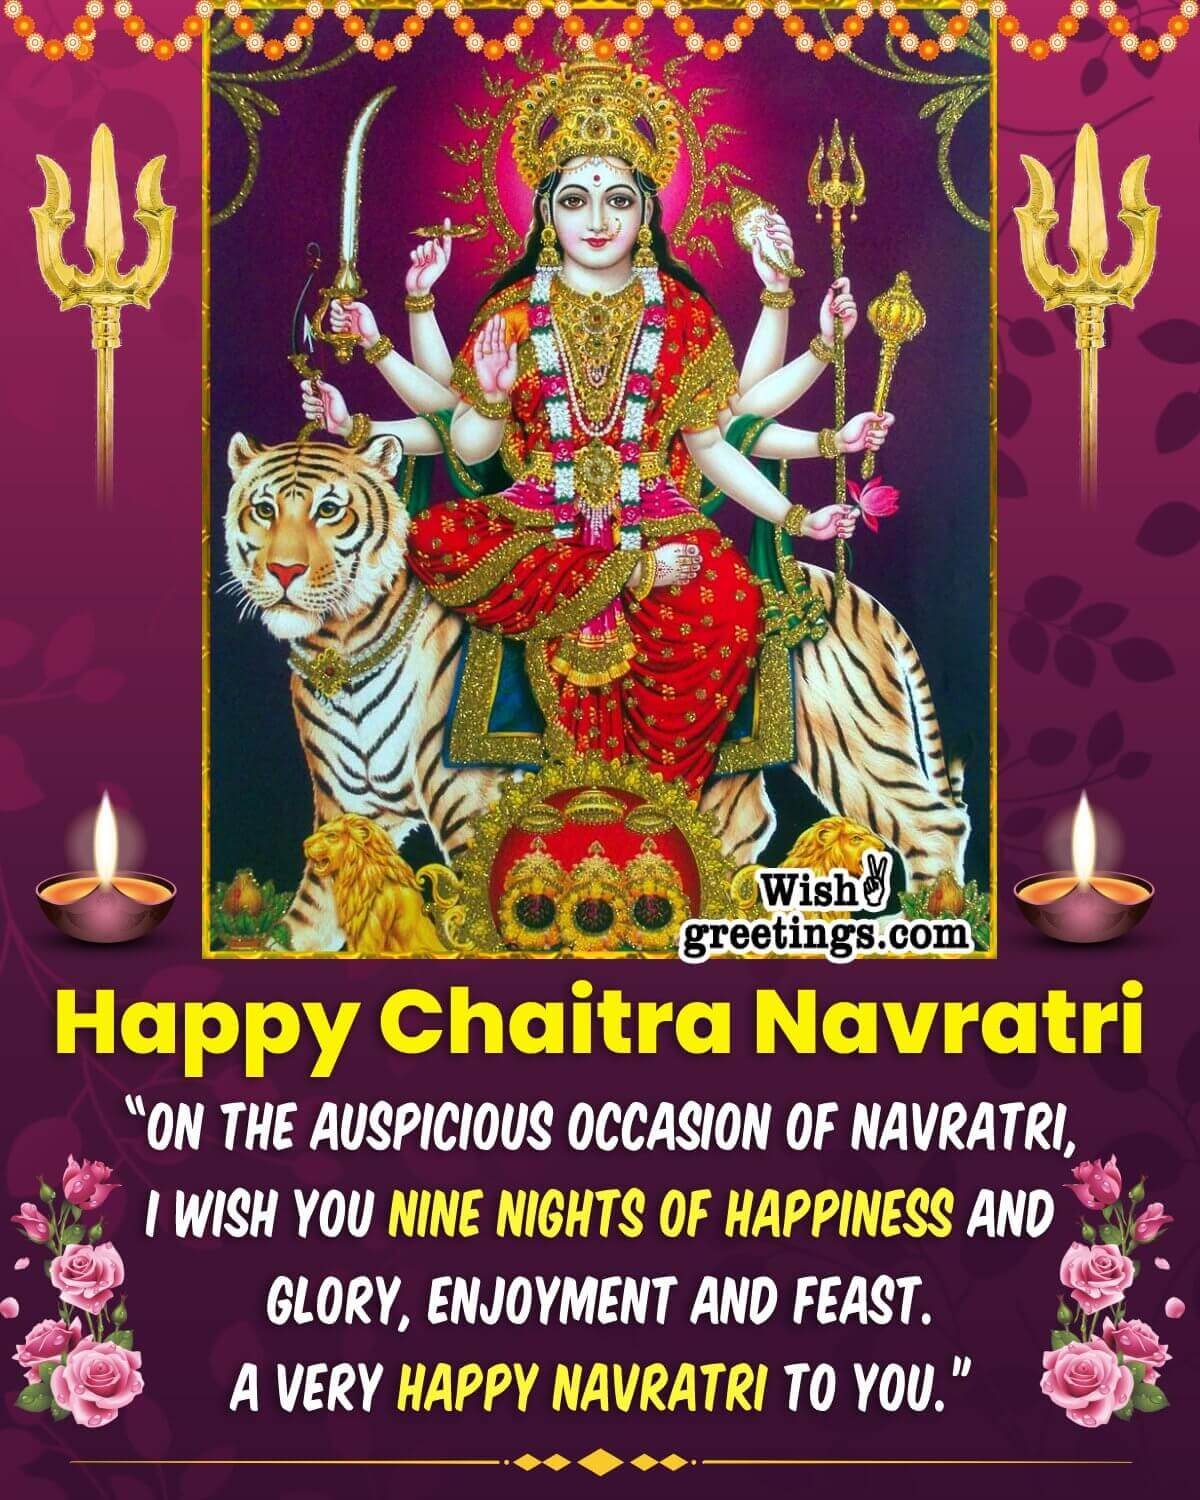 Chaitra Navratri Wishes Messages - Wish Greetings